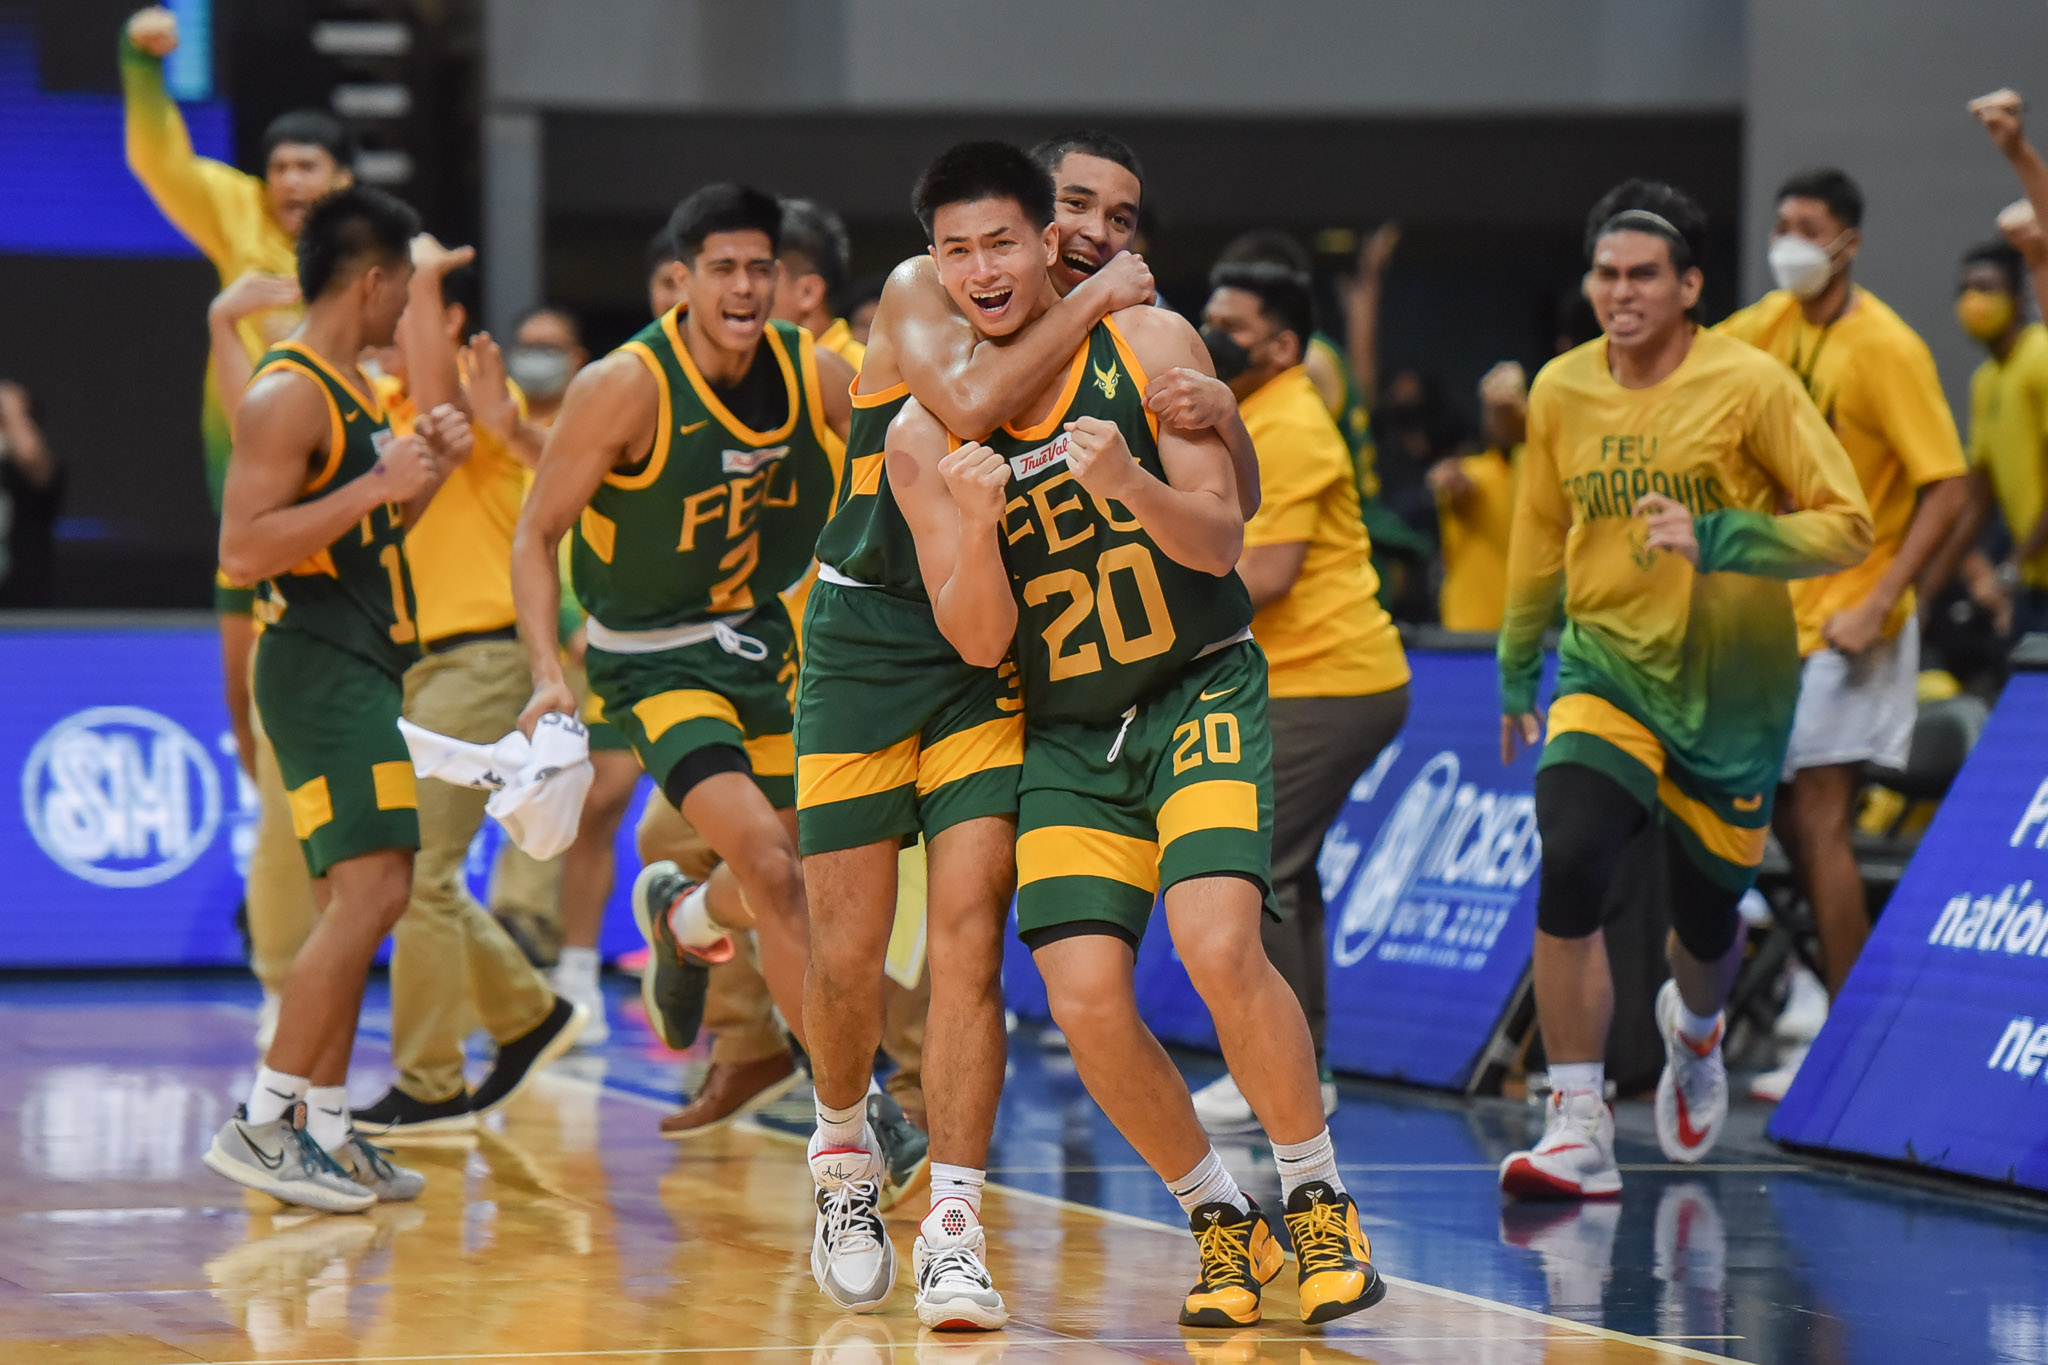 FEU celebrates Xyrus Torres' game-winning three in a crucial victory vs NU. UAAP PHOTO